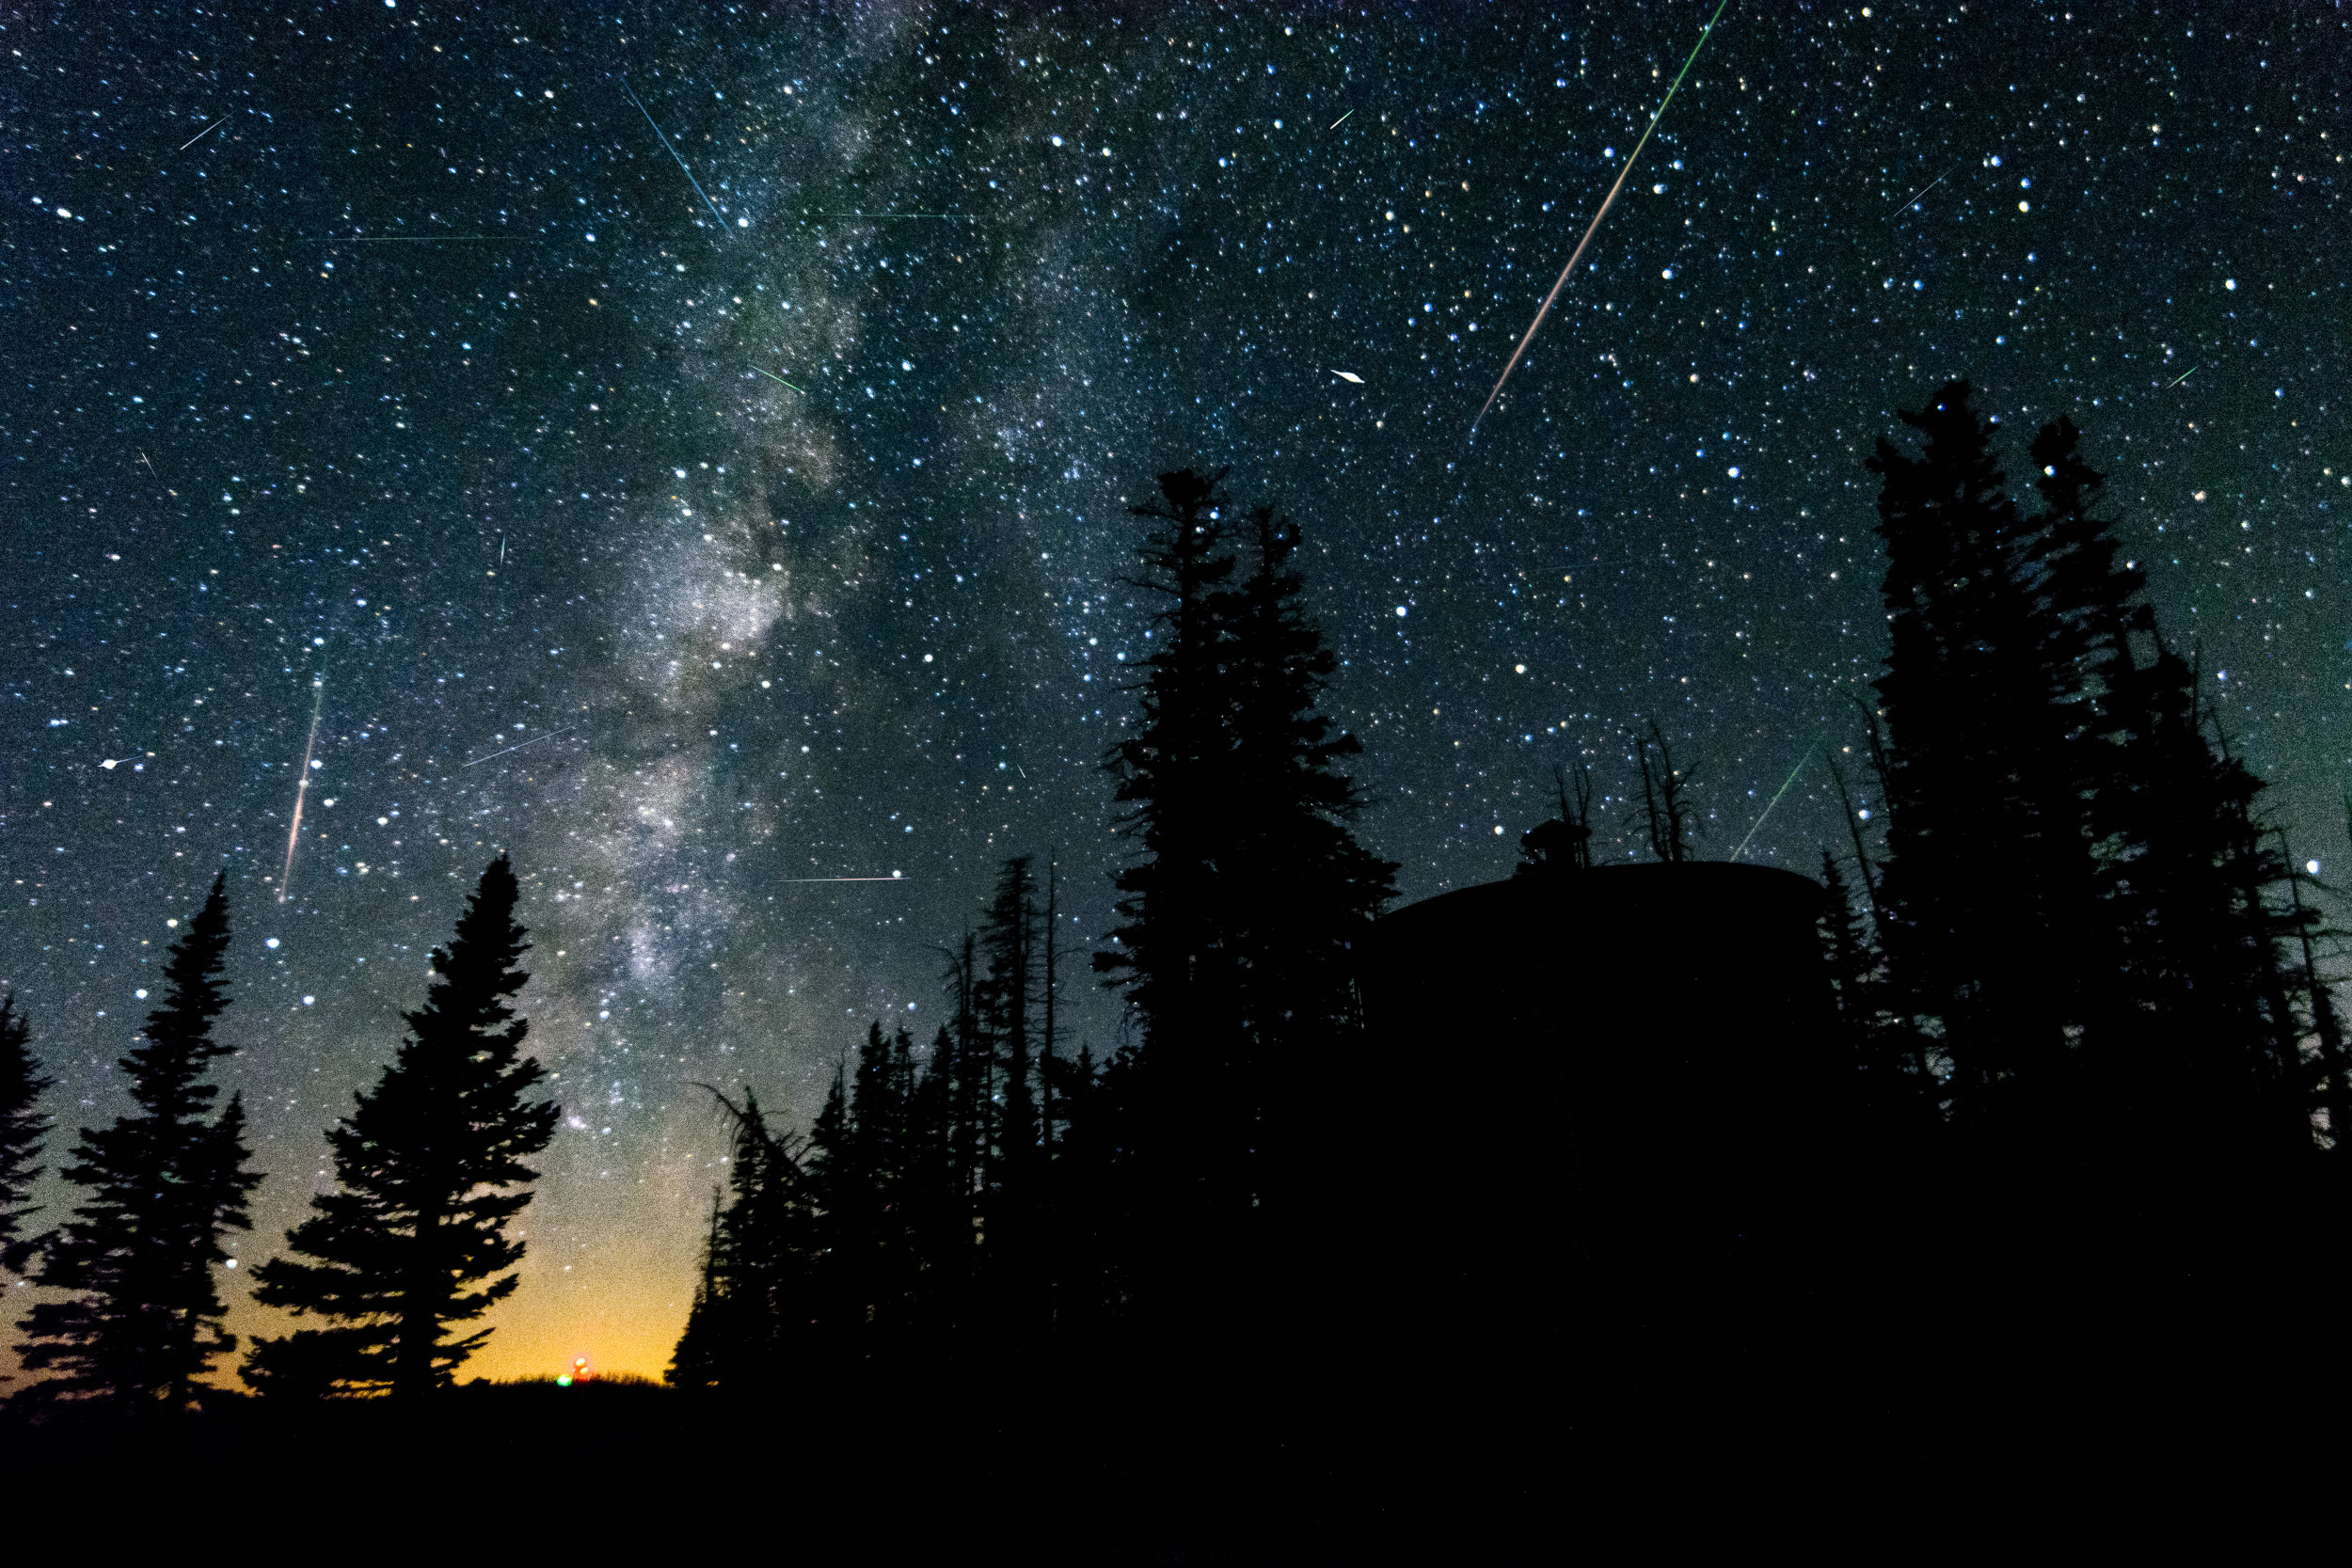 Best Time To See Perseid Meteor Shower 2021, Most Impressive of the Year